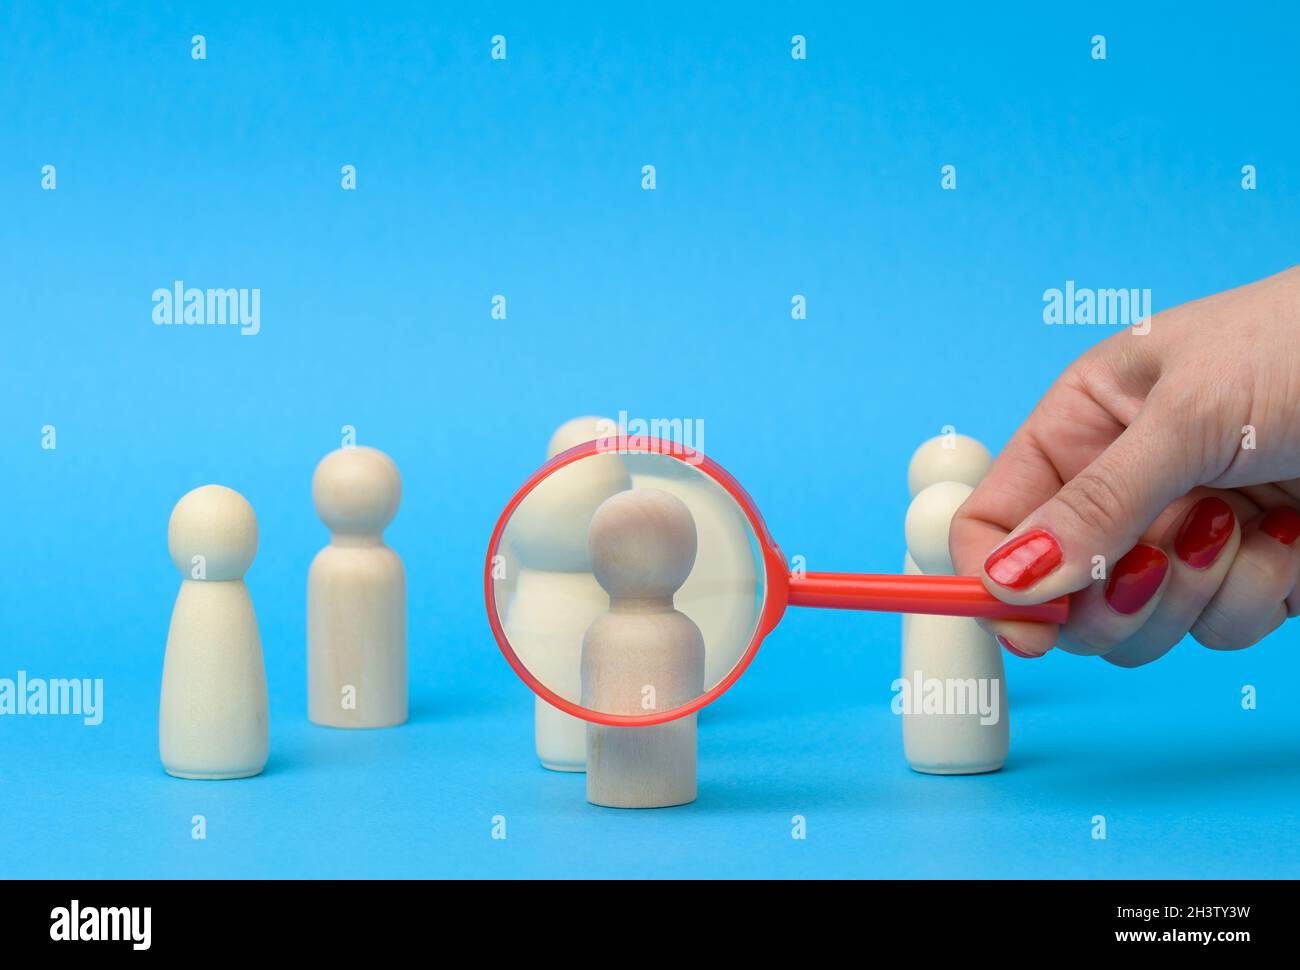 Wooden figures of men stand on a blue background and a red magnifying glass Stock Photo